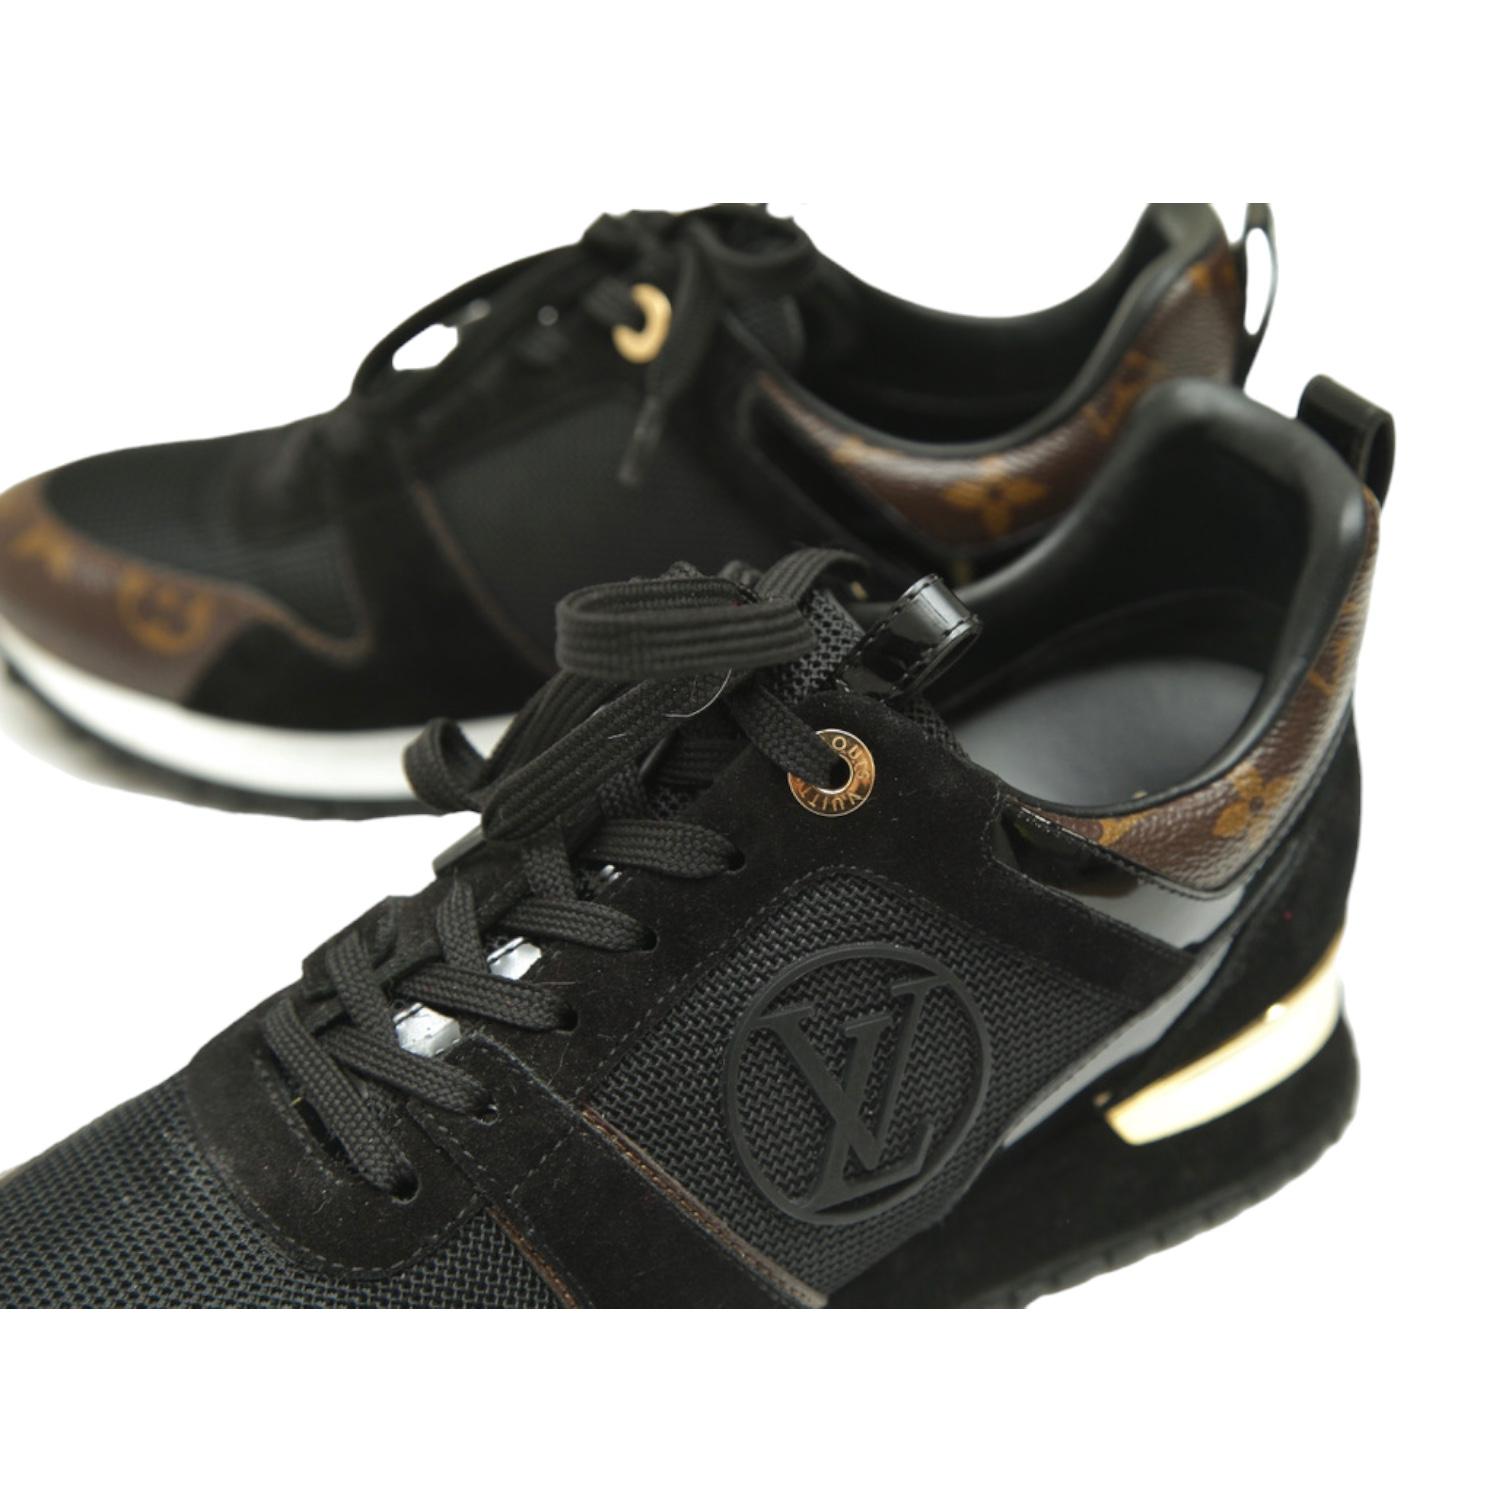 LOUIS VUITTON Sneakers RUN AWAY Black Suede Monogram Gold Lace Up Trainer Sz 38 For Sale 2